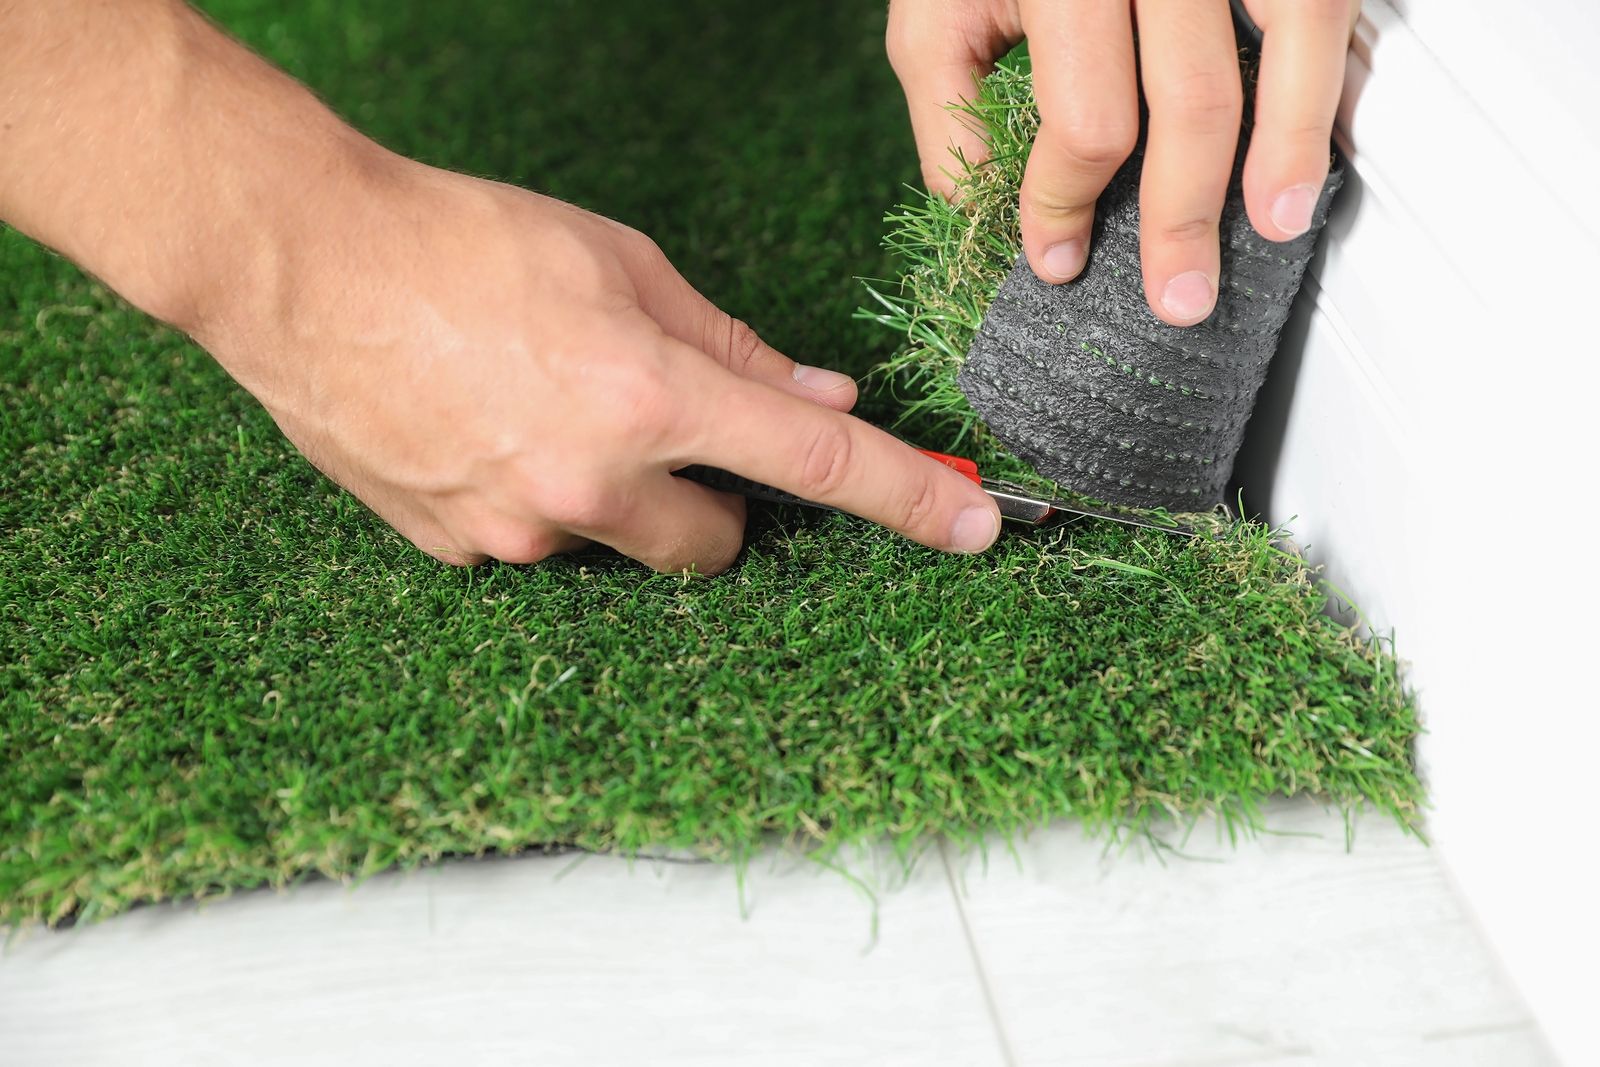 The Installation Process Of Premium Grass Blades’ Artificial Turf